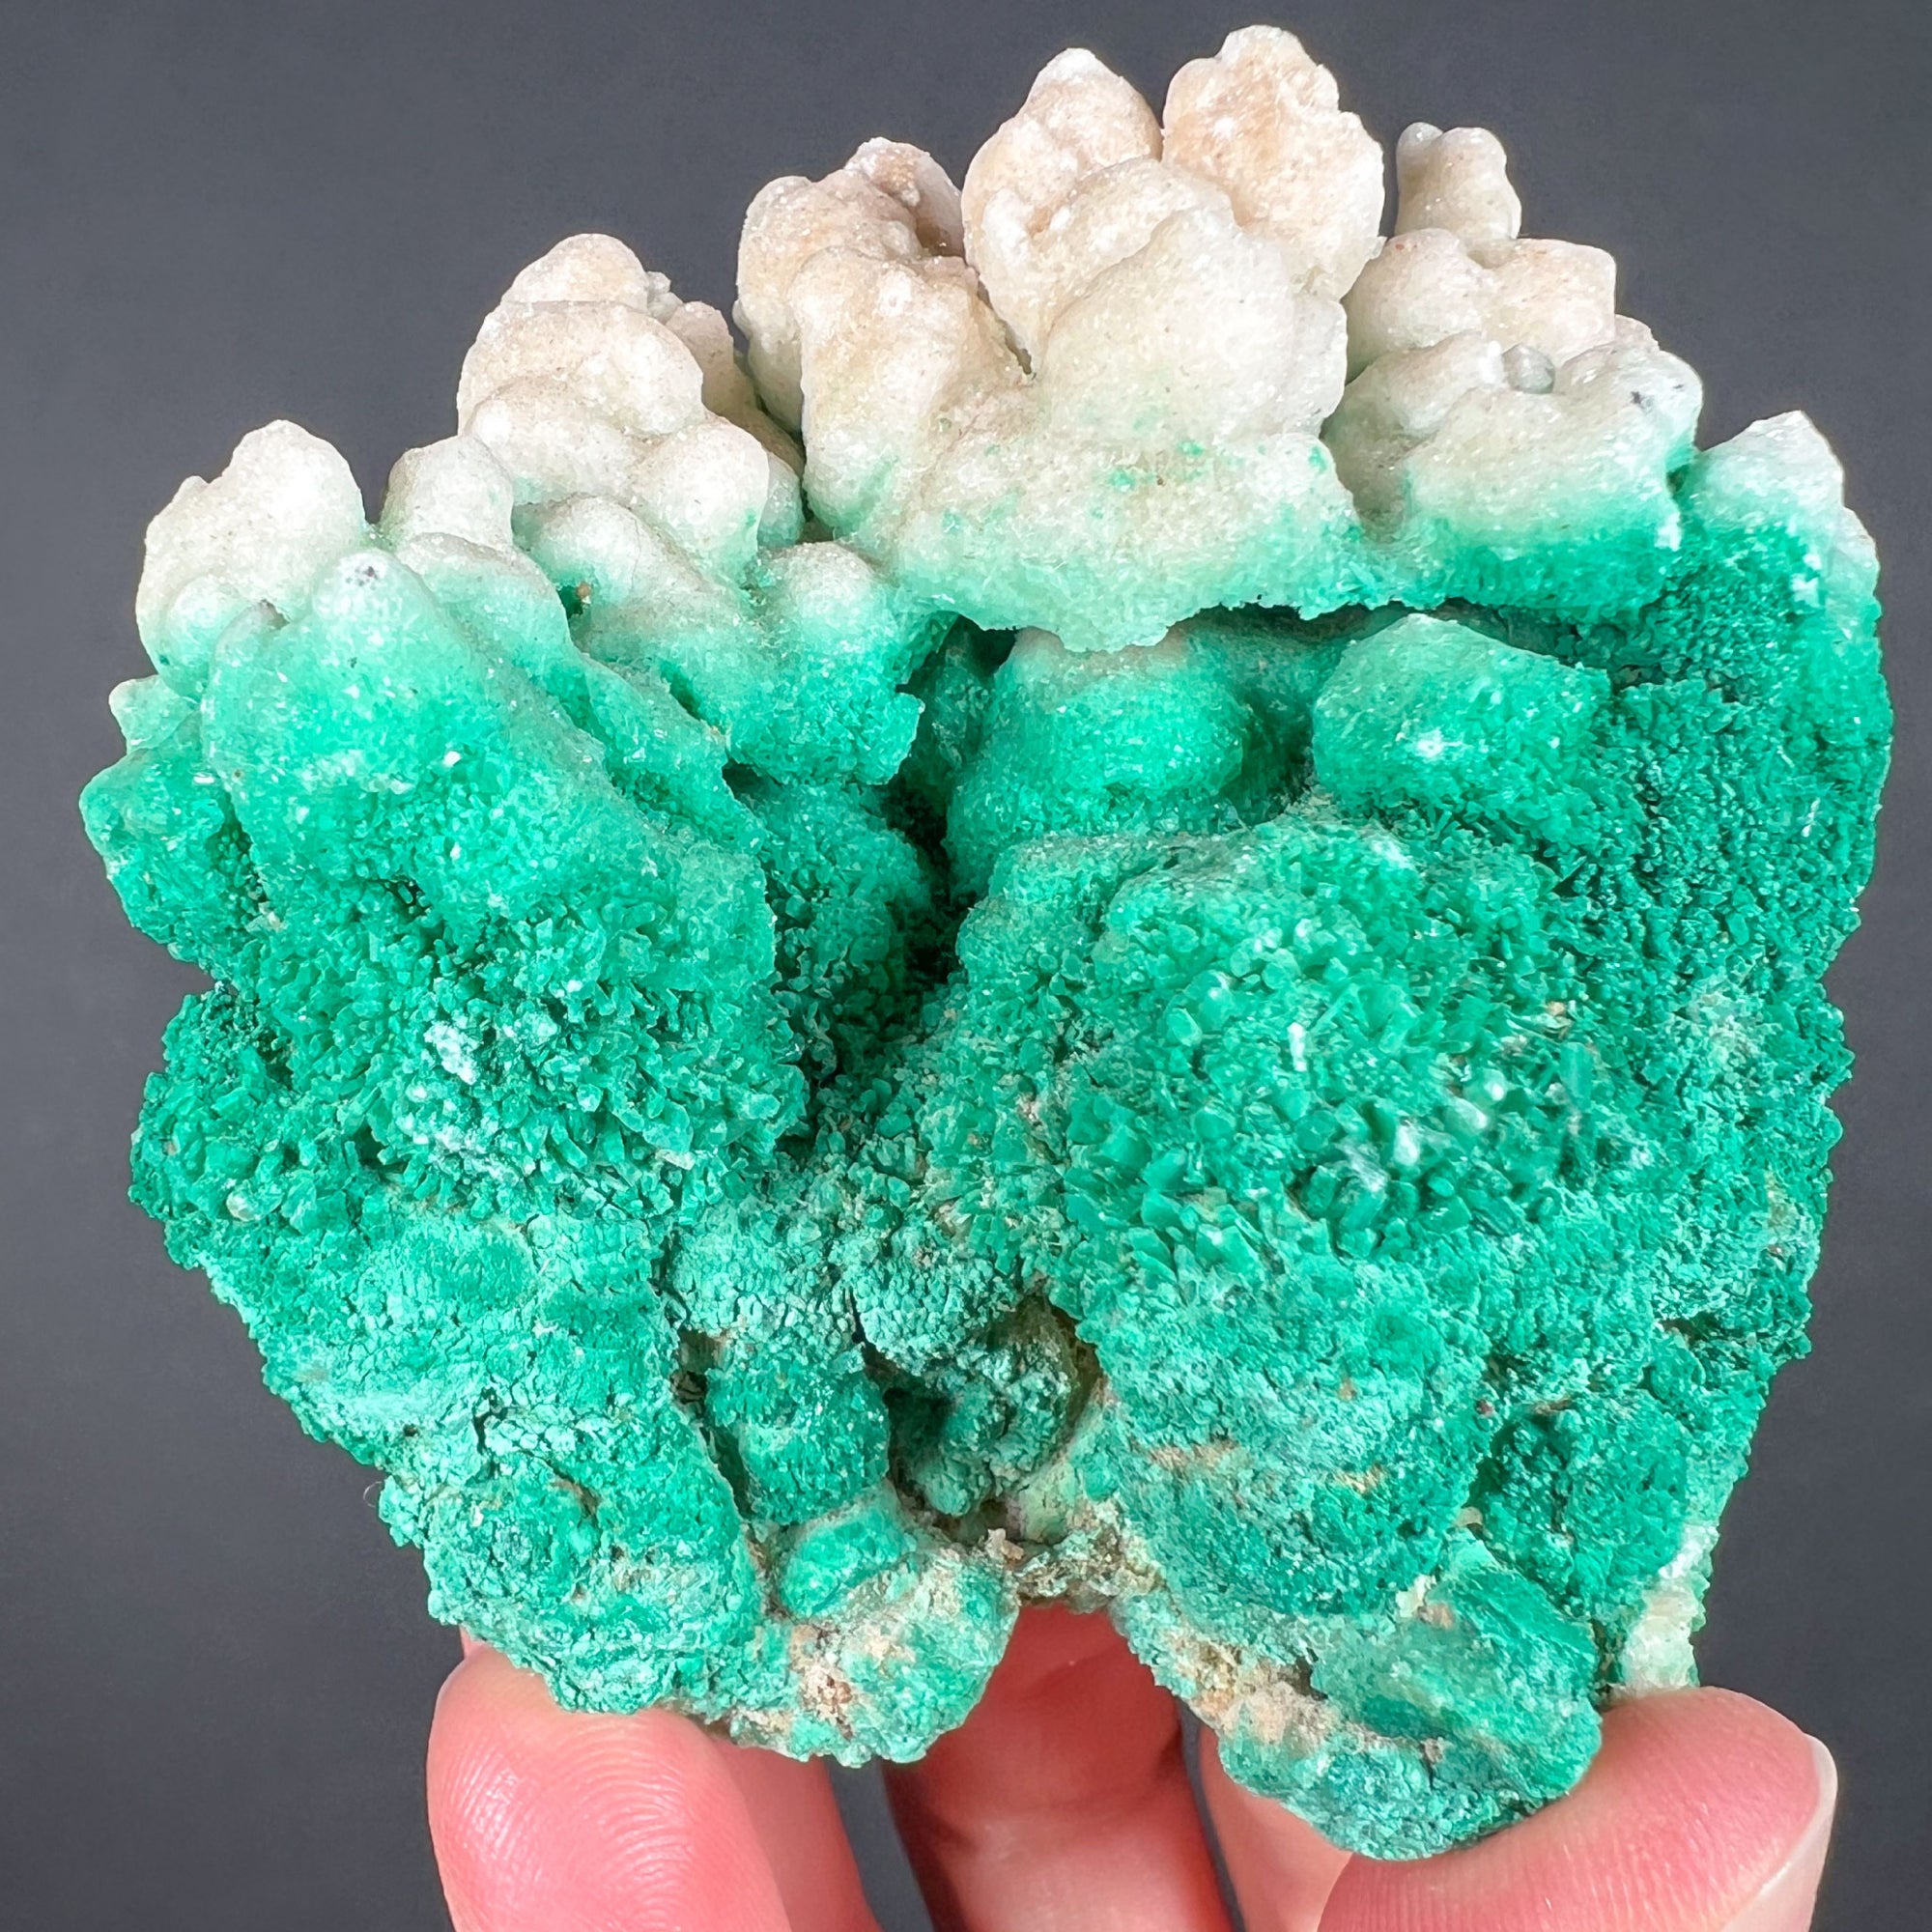 Green and White Crystals of Selenite Gypsum